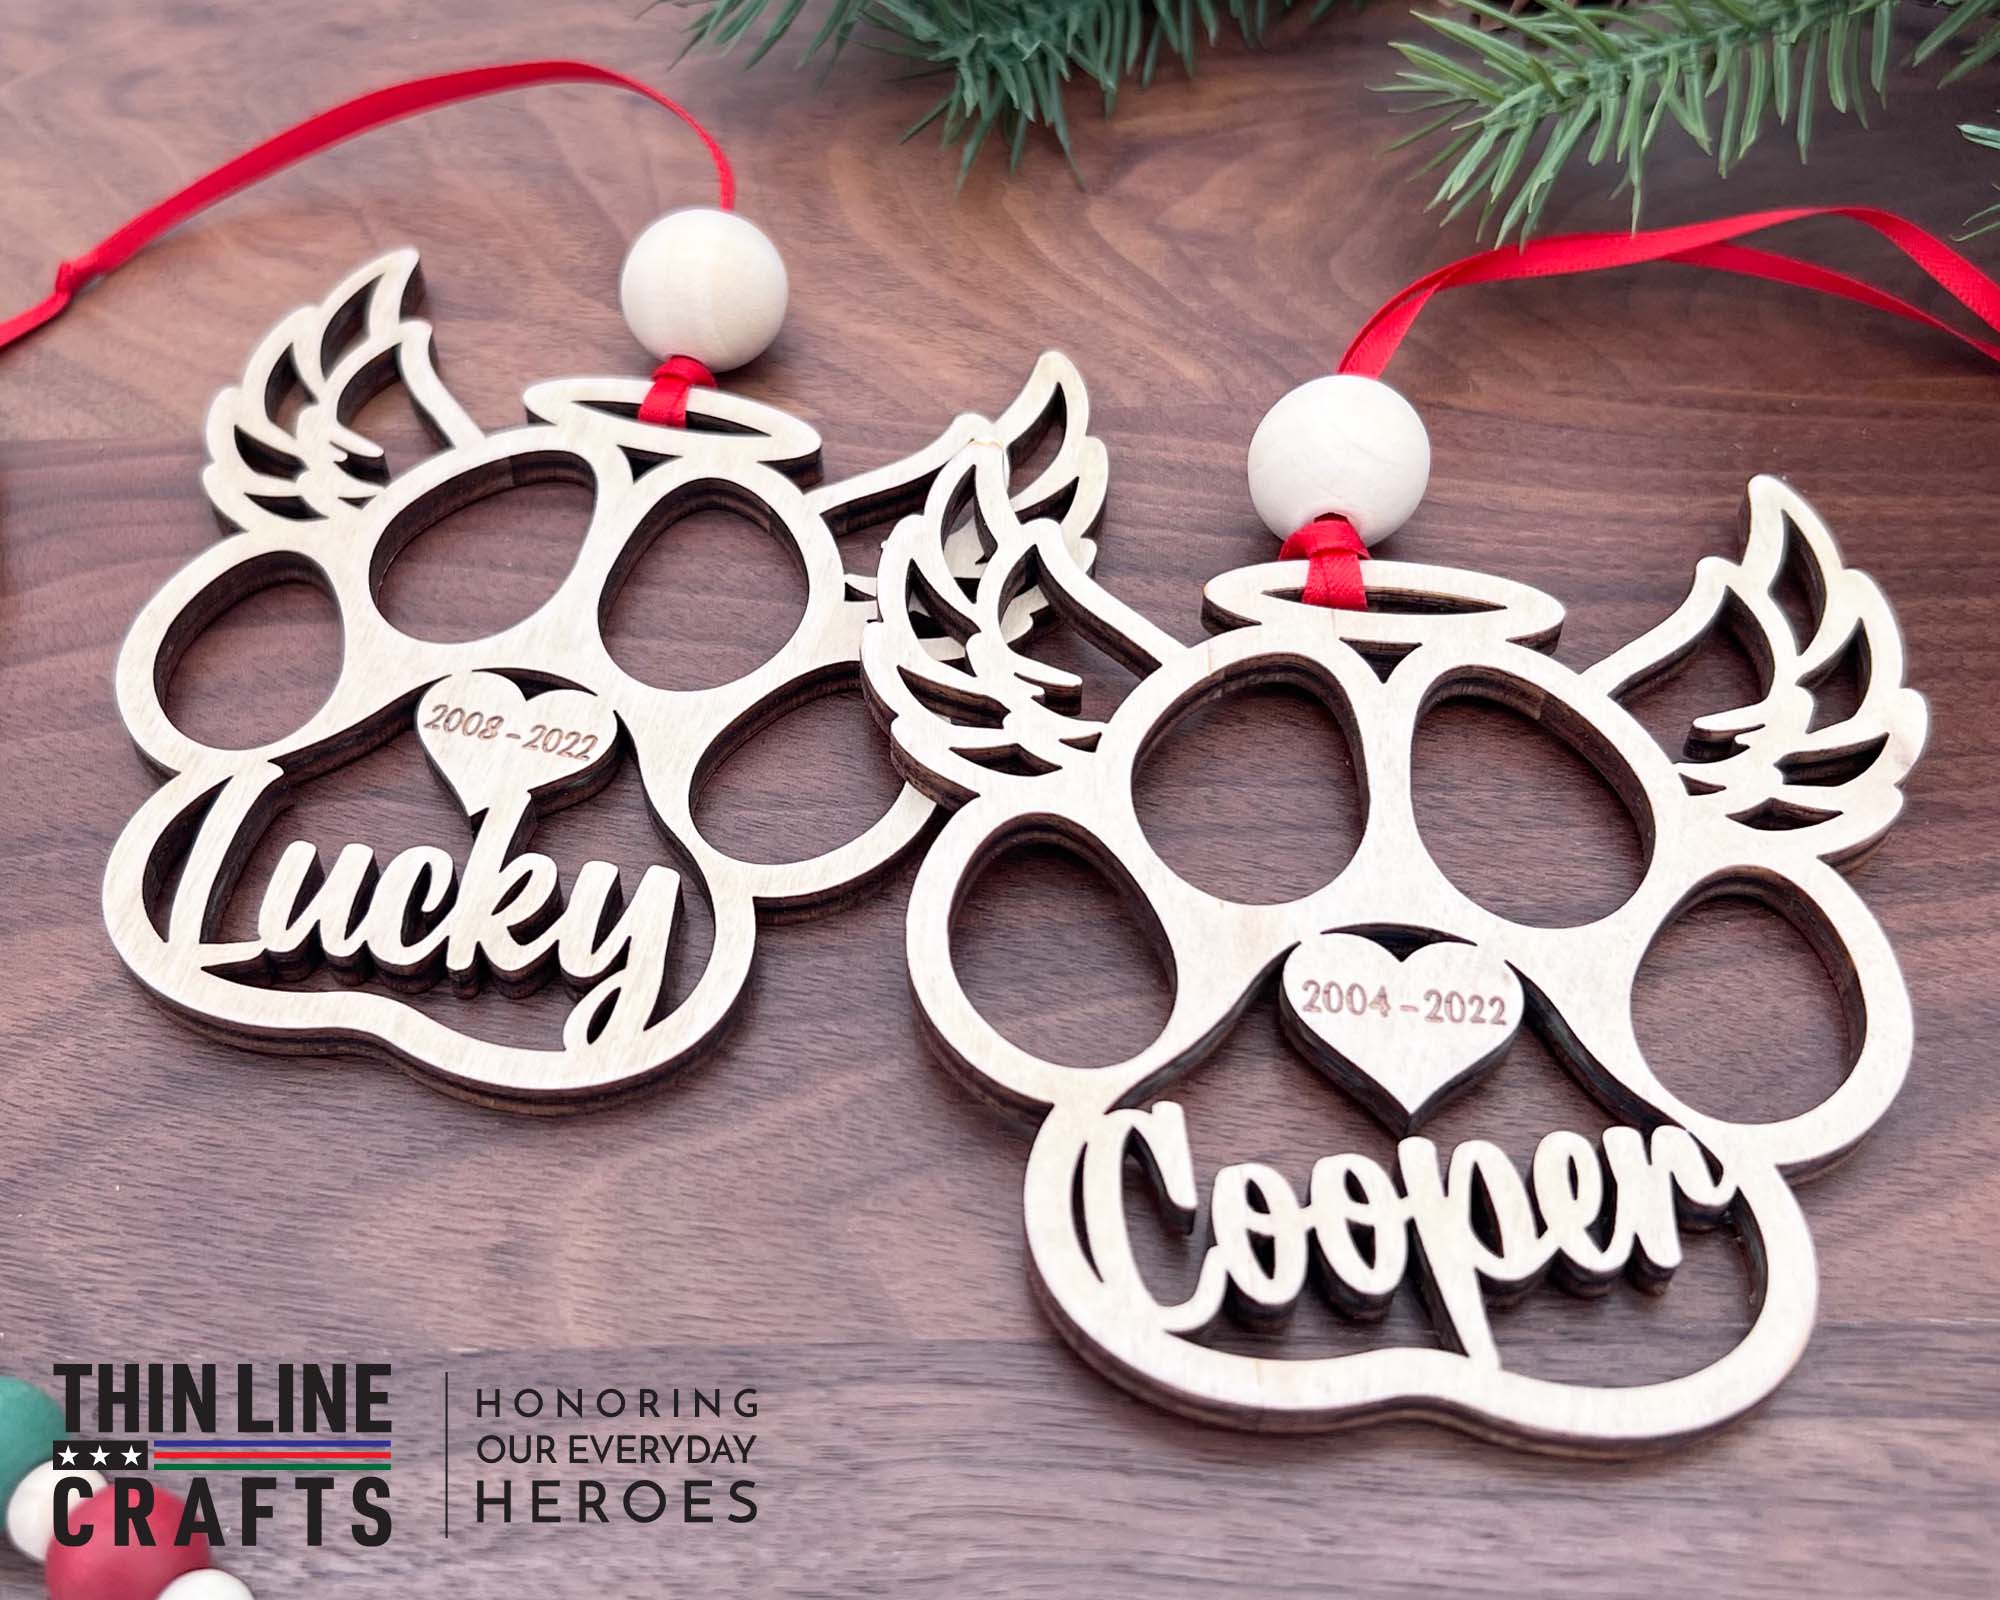 Angel Pet Paw Christmas Ornament, Personalized with Name